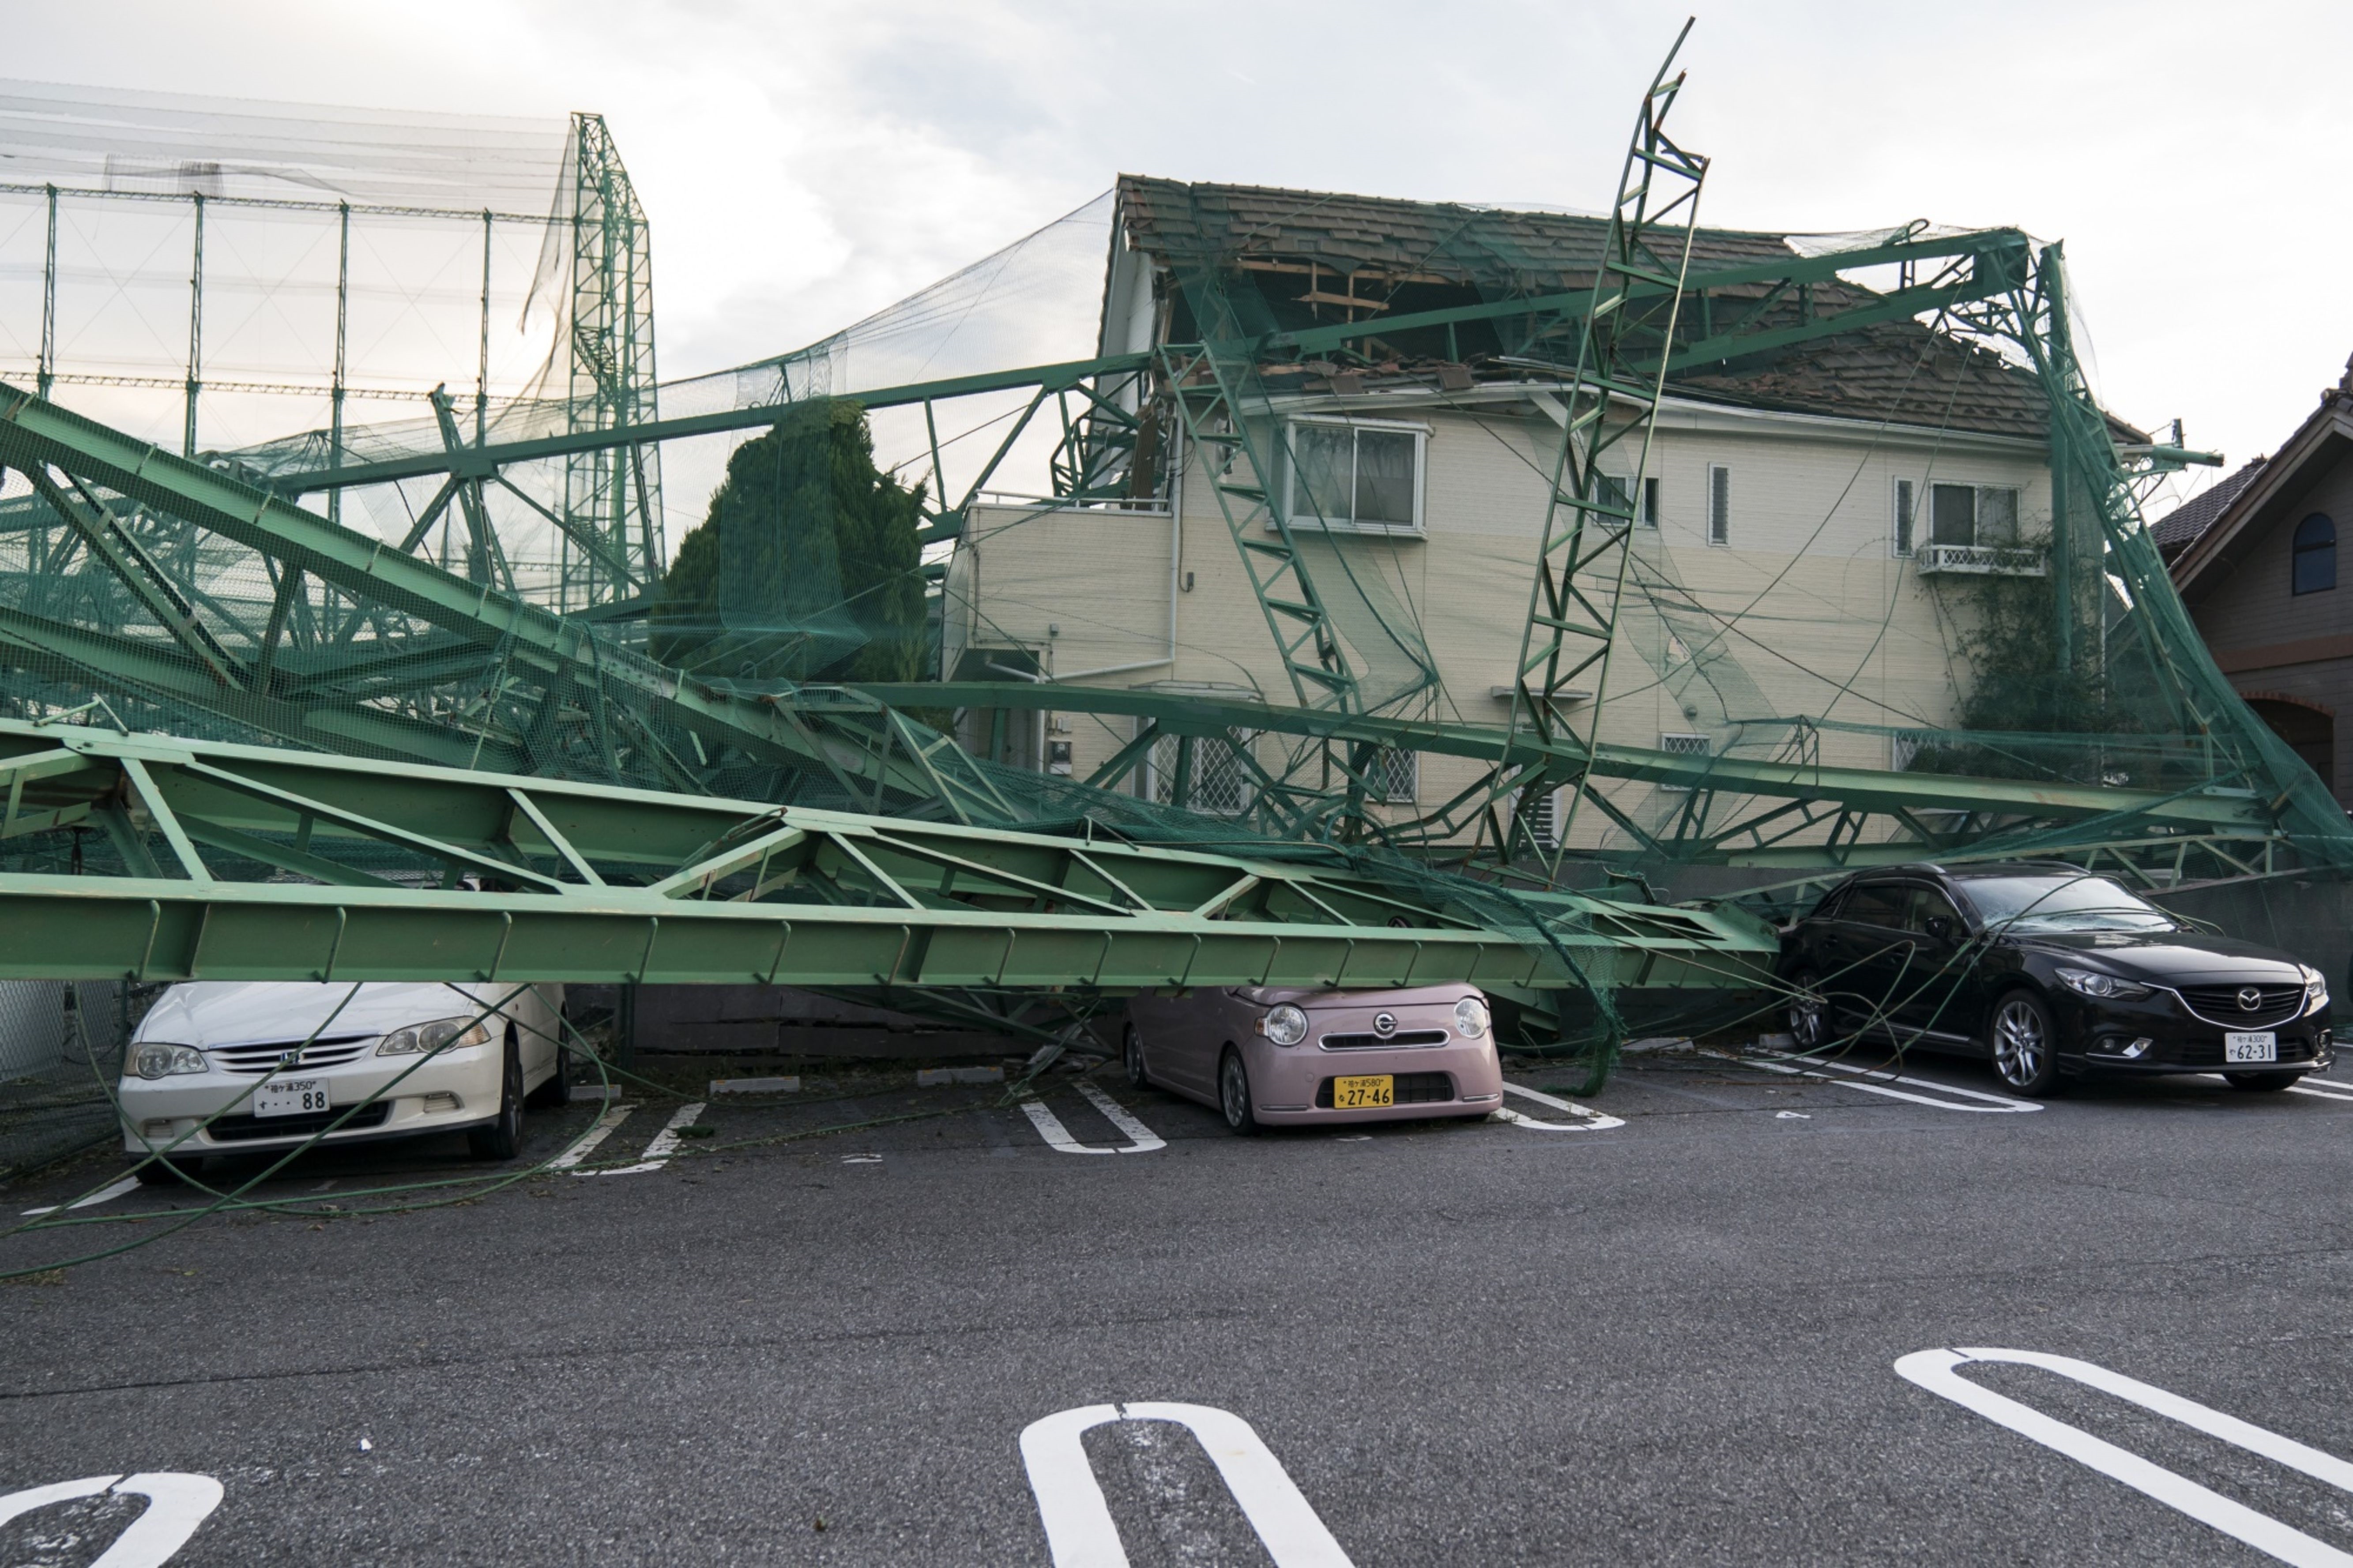 A fence around a driving range that collapsed on a house and cars due to Typhoon Faxai is seen on Sept. 9 in Ichihara, Chiba Prefecture. | GETTY IMAGES / VIA BLOOMBERG